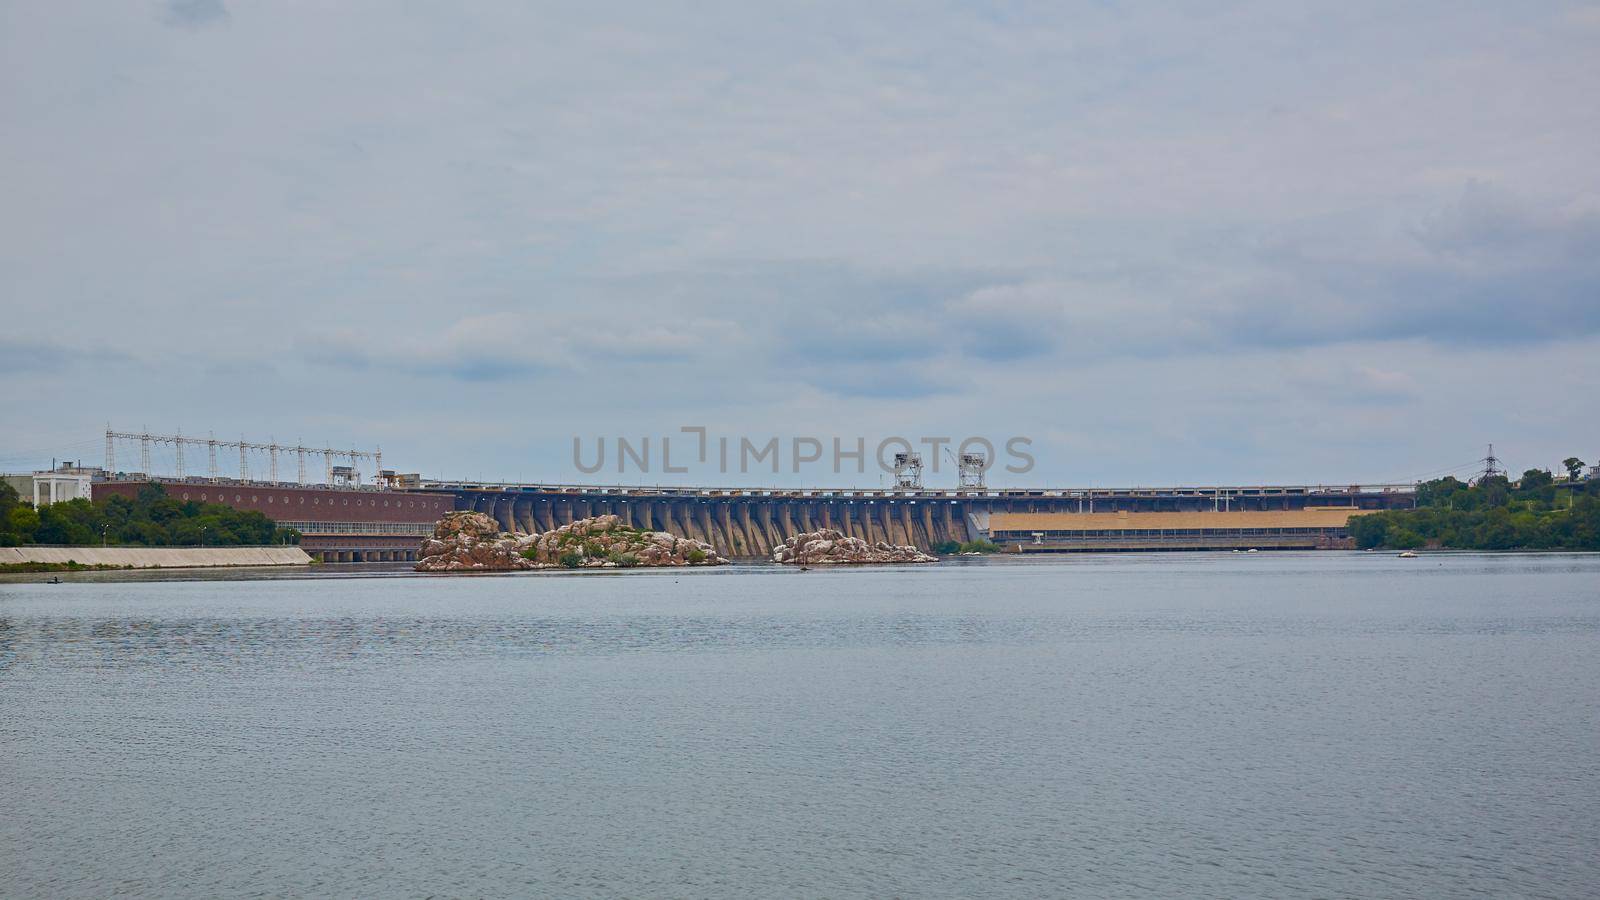 DniproGES in Zaporozhye. Hydroelectric power station on the Dnipro River by sarymsakov